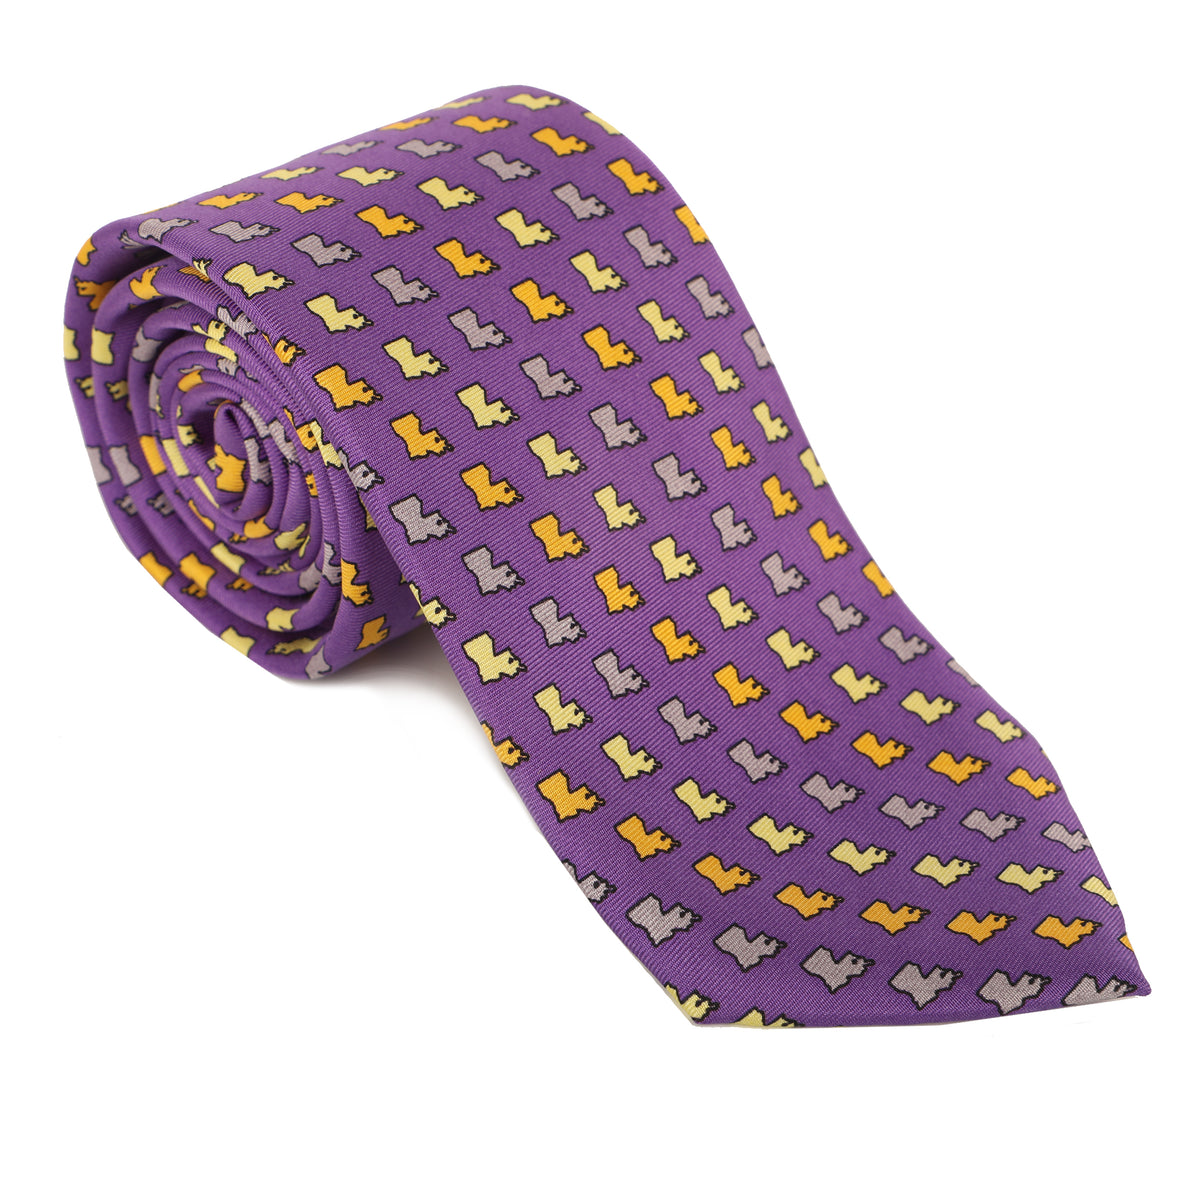 Represent like royalty in our regal 100% silk ties. Purple &amp; gold and good to geaux (go)! Tie one on so you can tie one on!  Limited Edition Haspel x NOLA Couture Exclusive Collaboration  •  100% Silk  •  3&quot; Wide  •  Seersucker Tipped and Seersucker Keeper  •  Made in USA